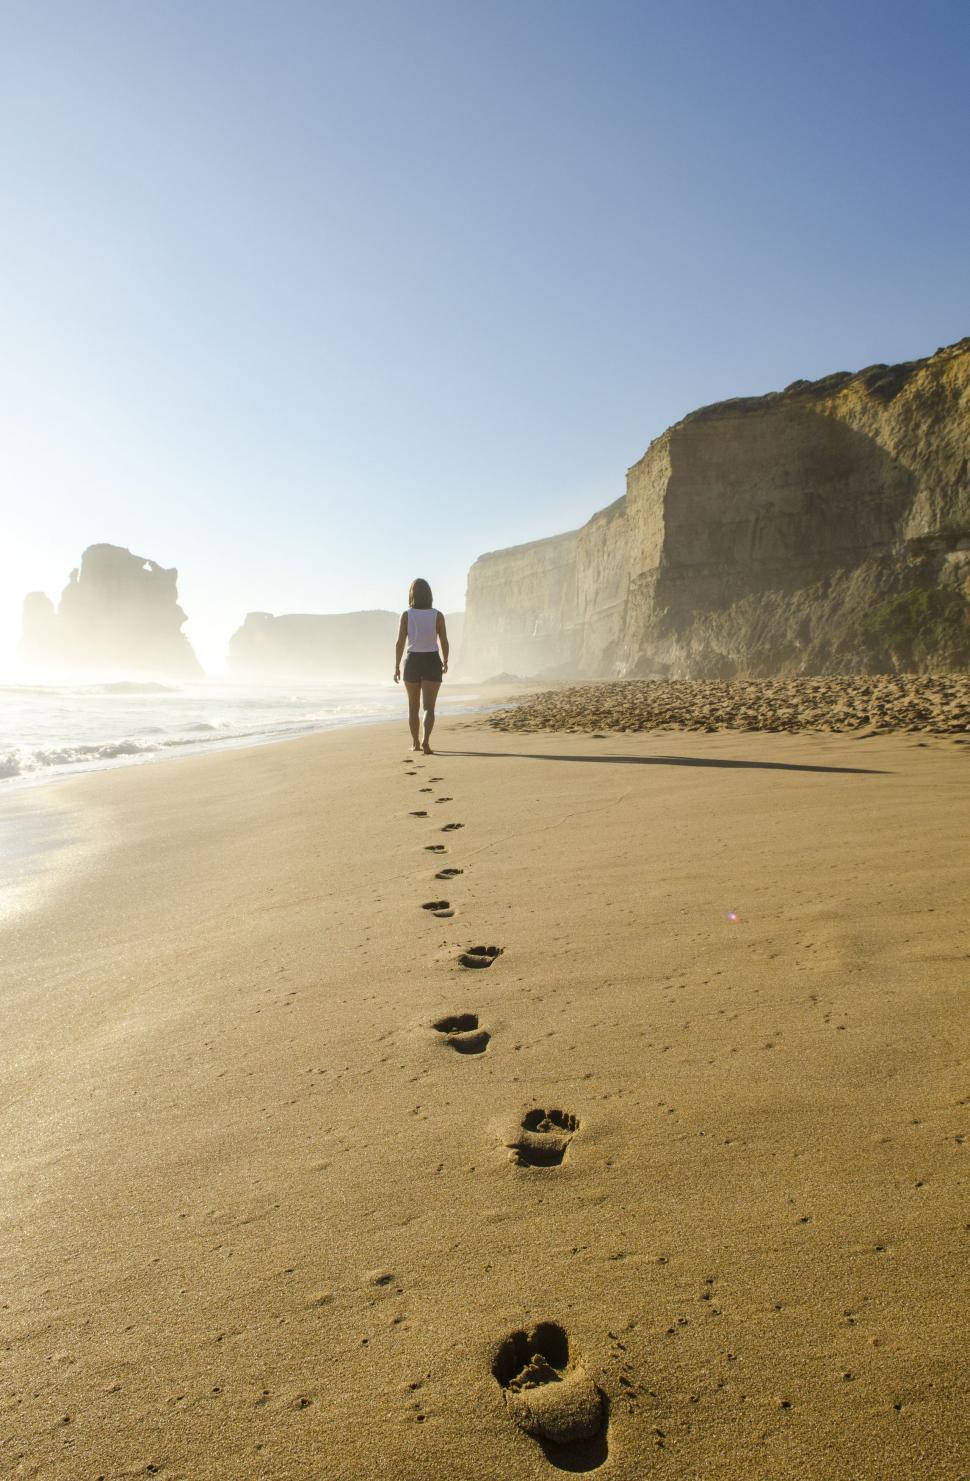 Free Image of Person Walking on Beach With Footprints in Sand 